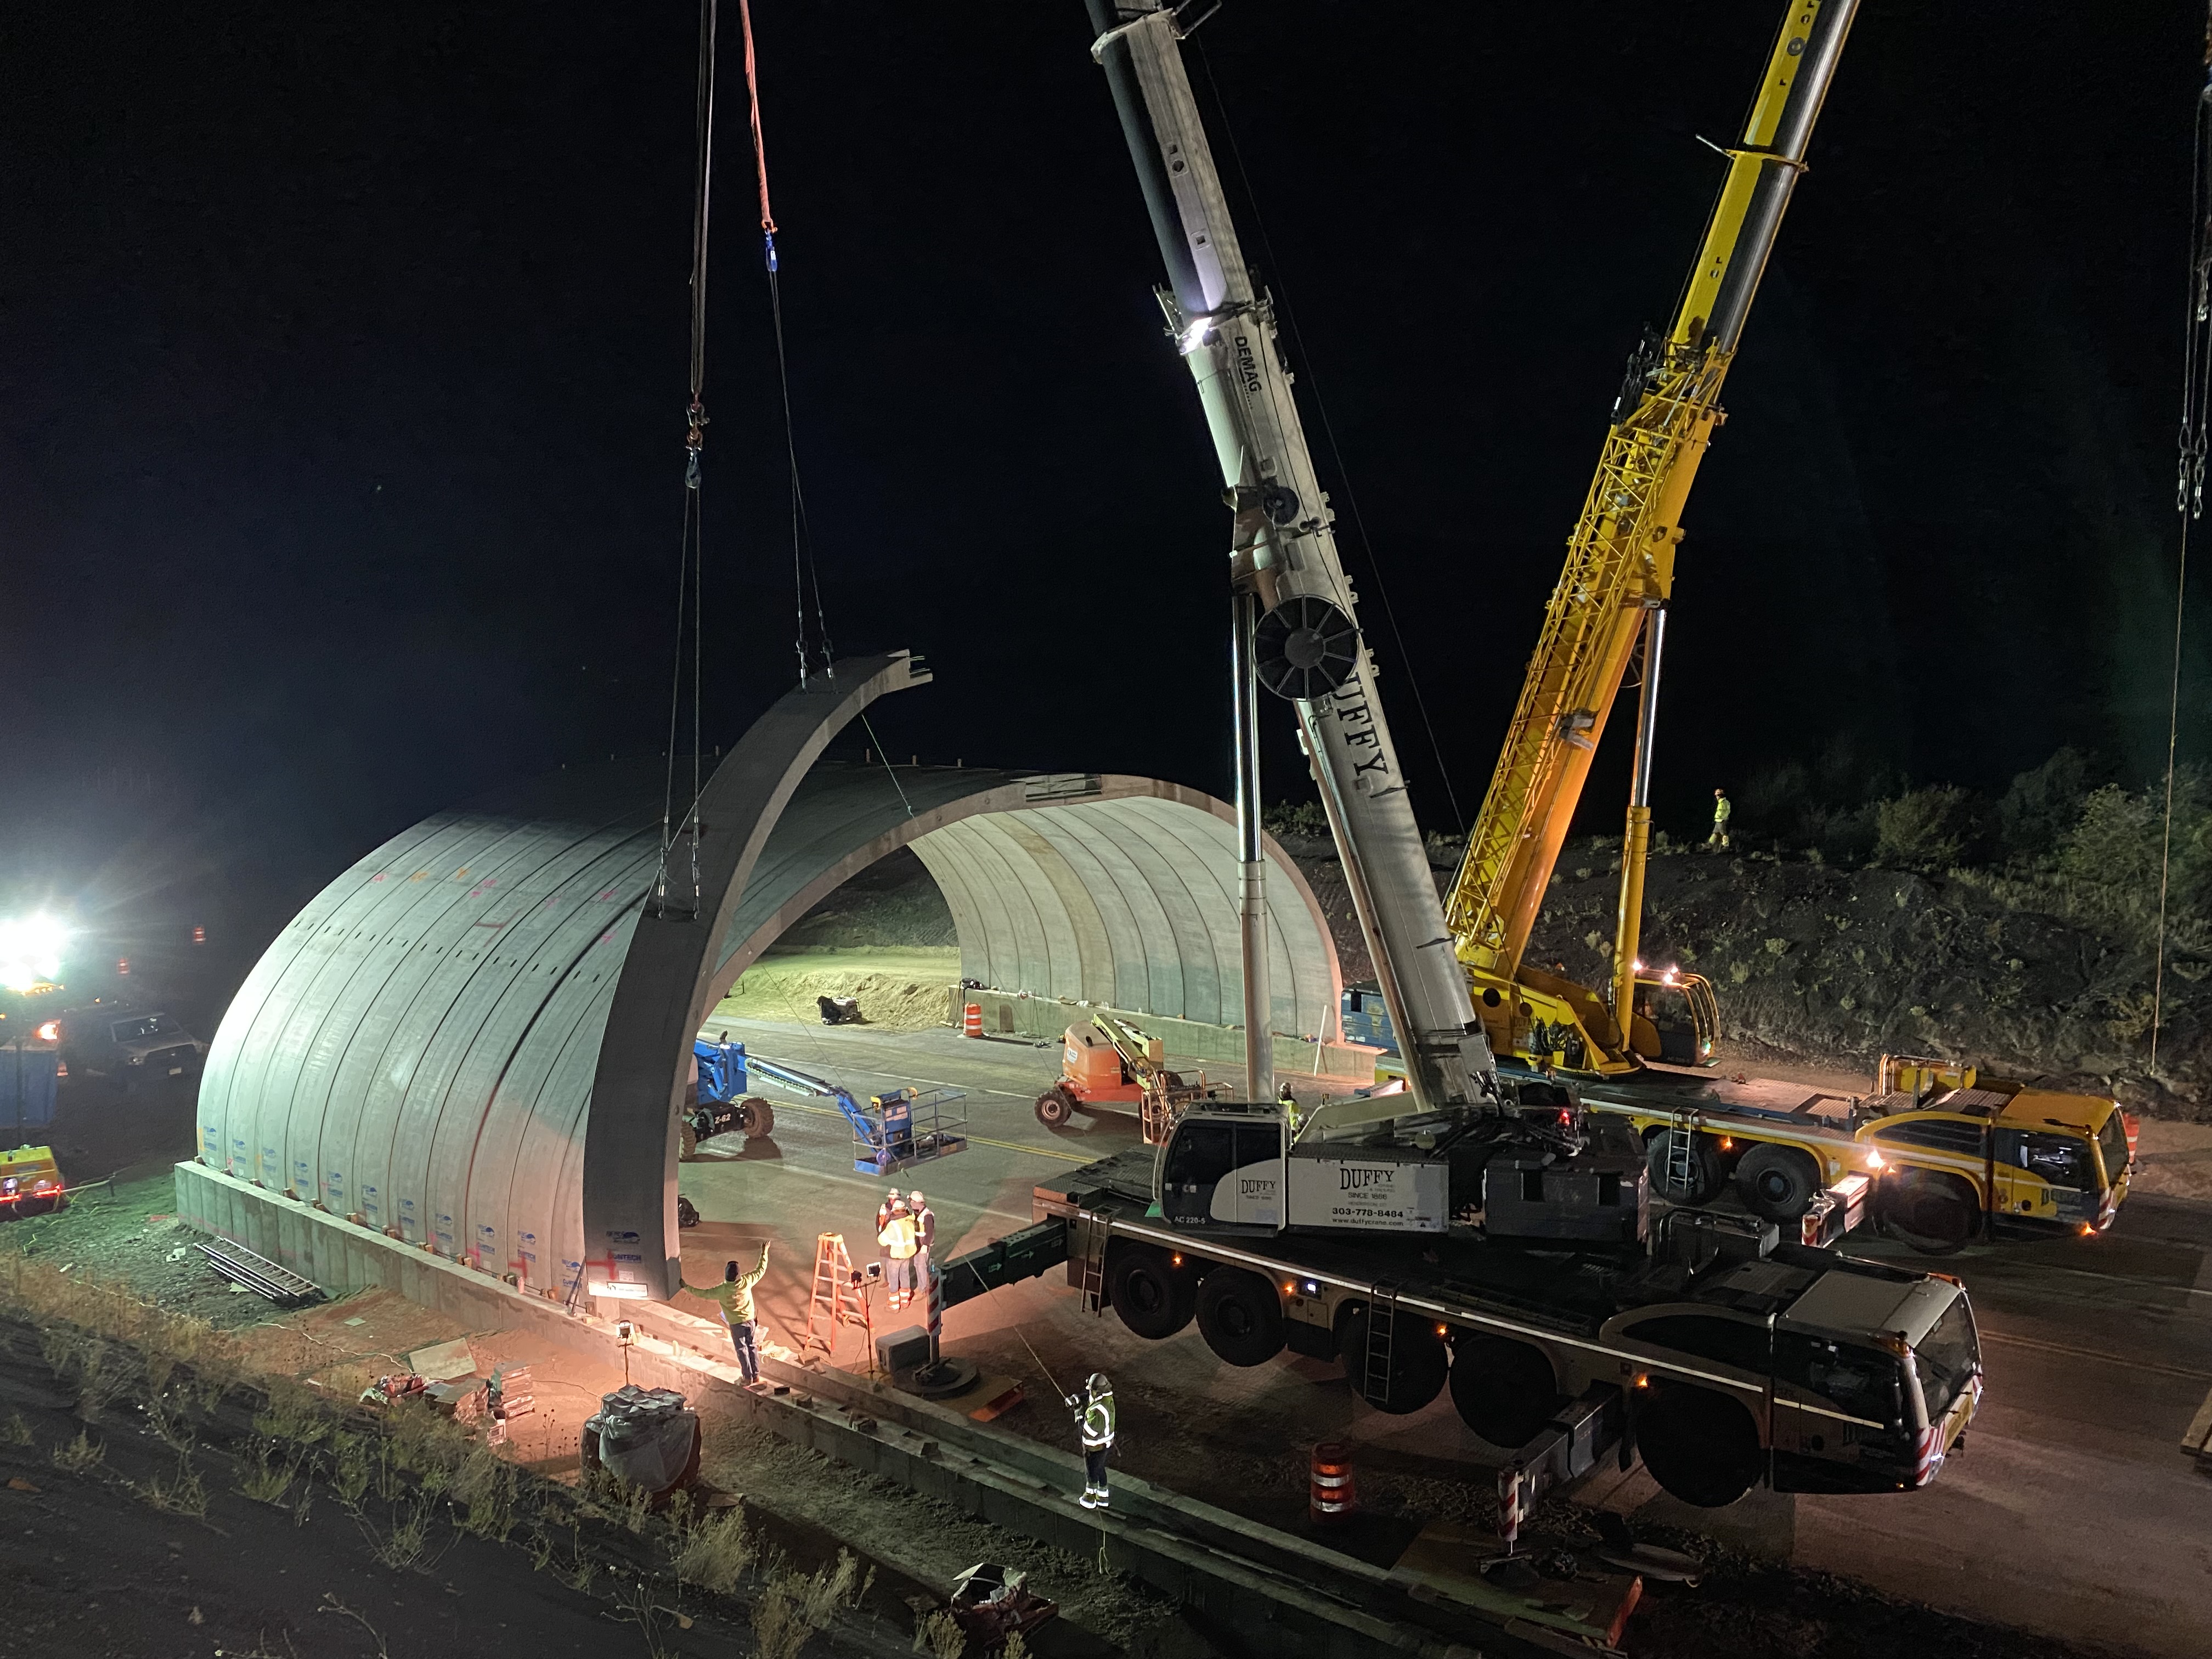 Placing concrete forms at US 160 Wildlife Project at night detail image